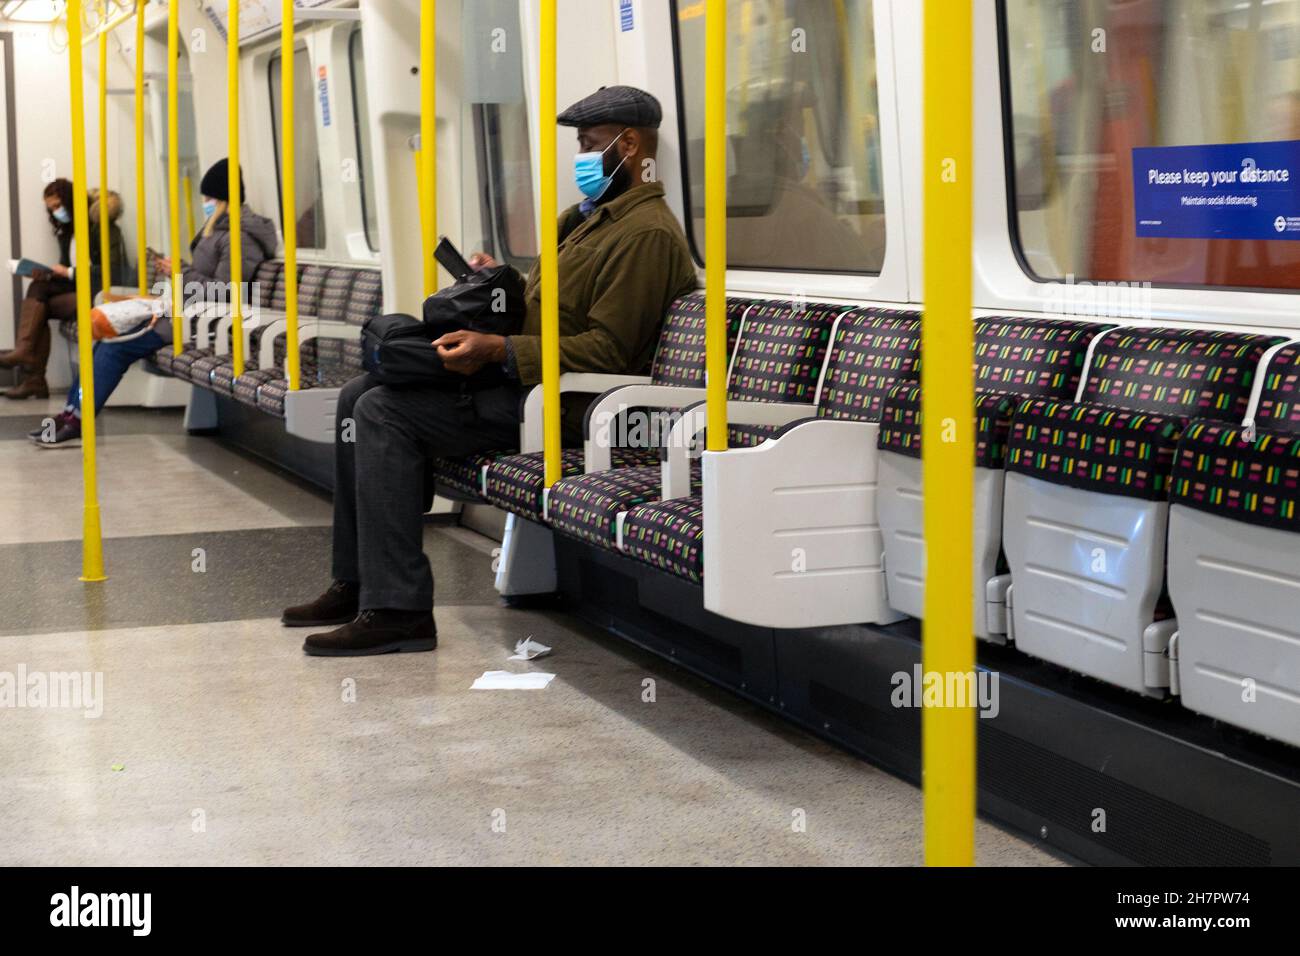 Older man sitting alone in tube TFL underground carriage wearing a covid facemask with empty seats in November 2021 London England UK    KATHY DEWITT Stock Photo